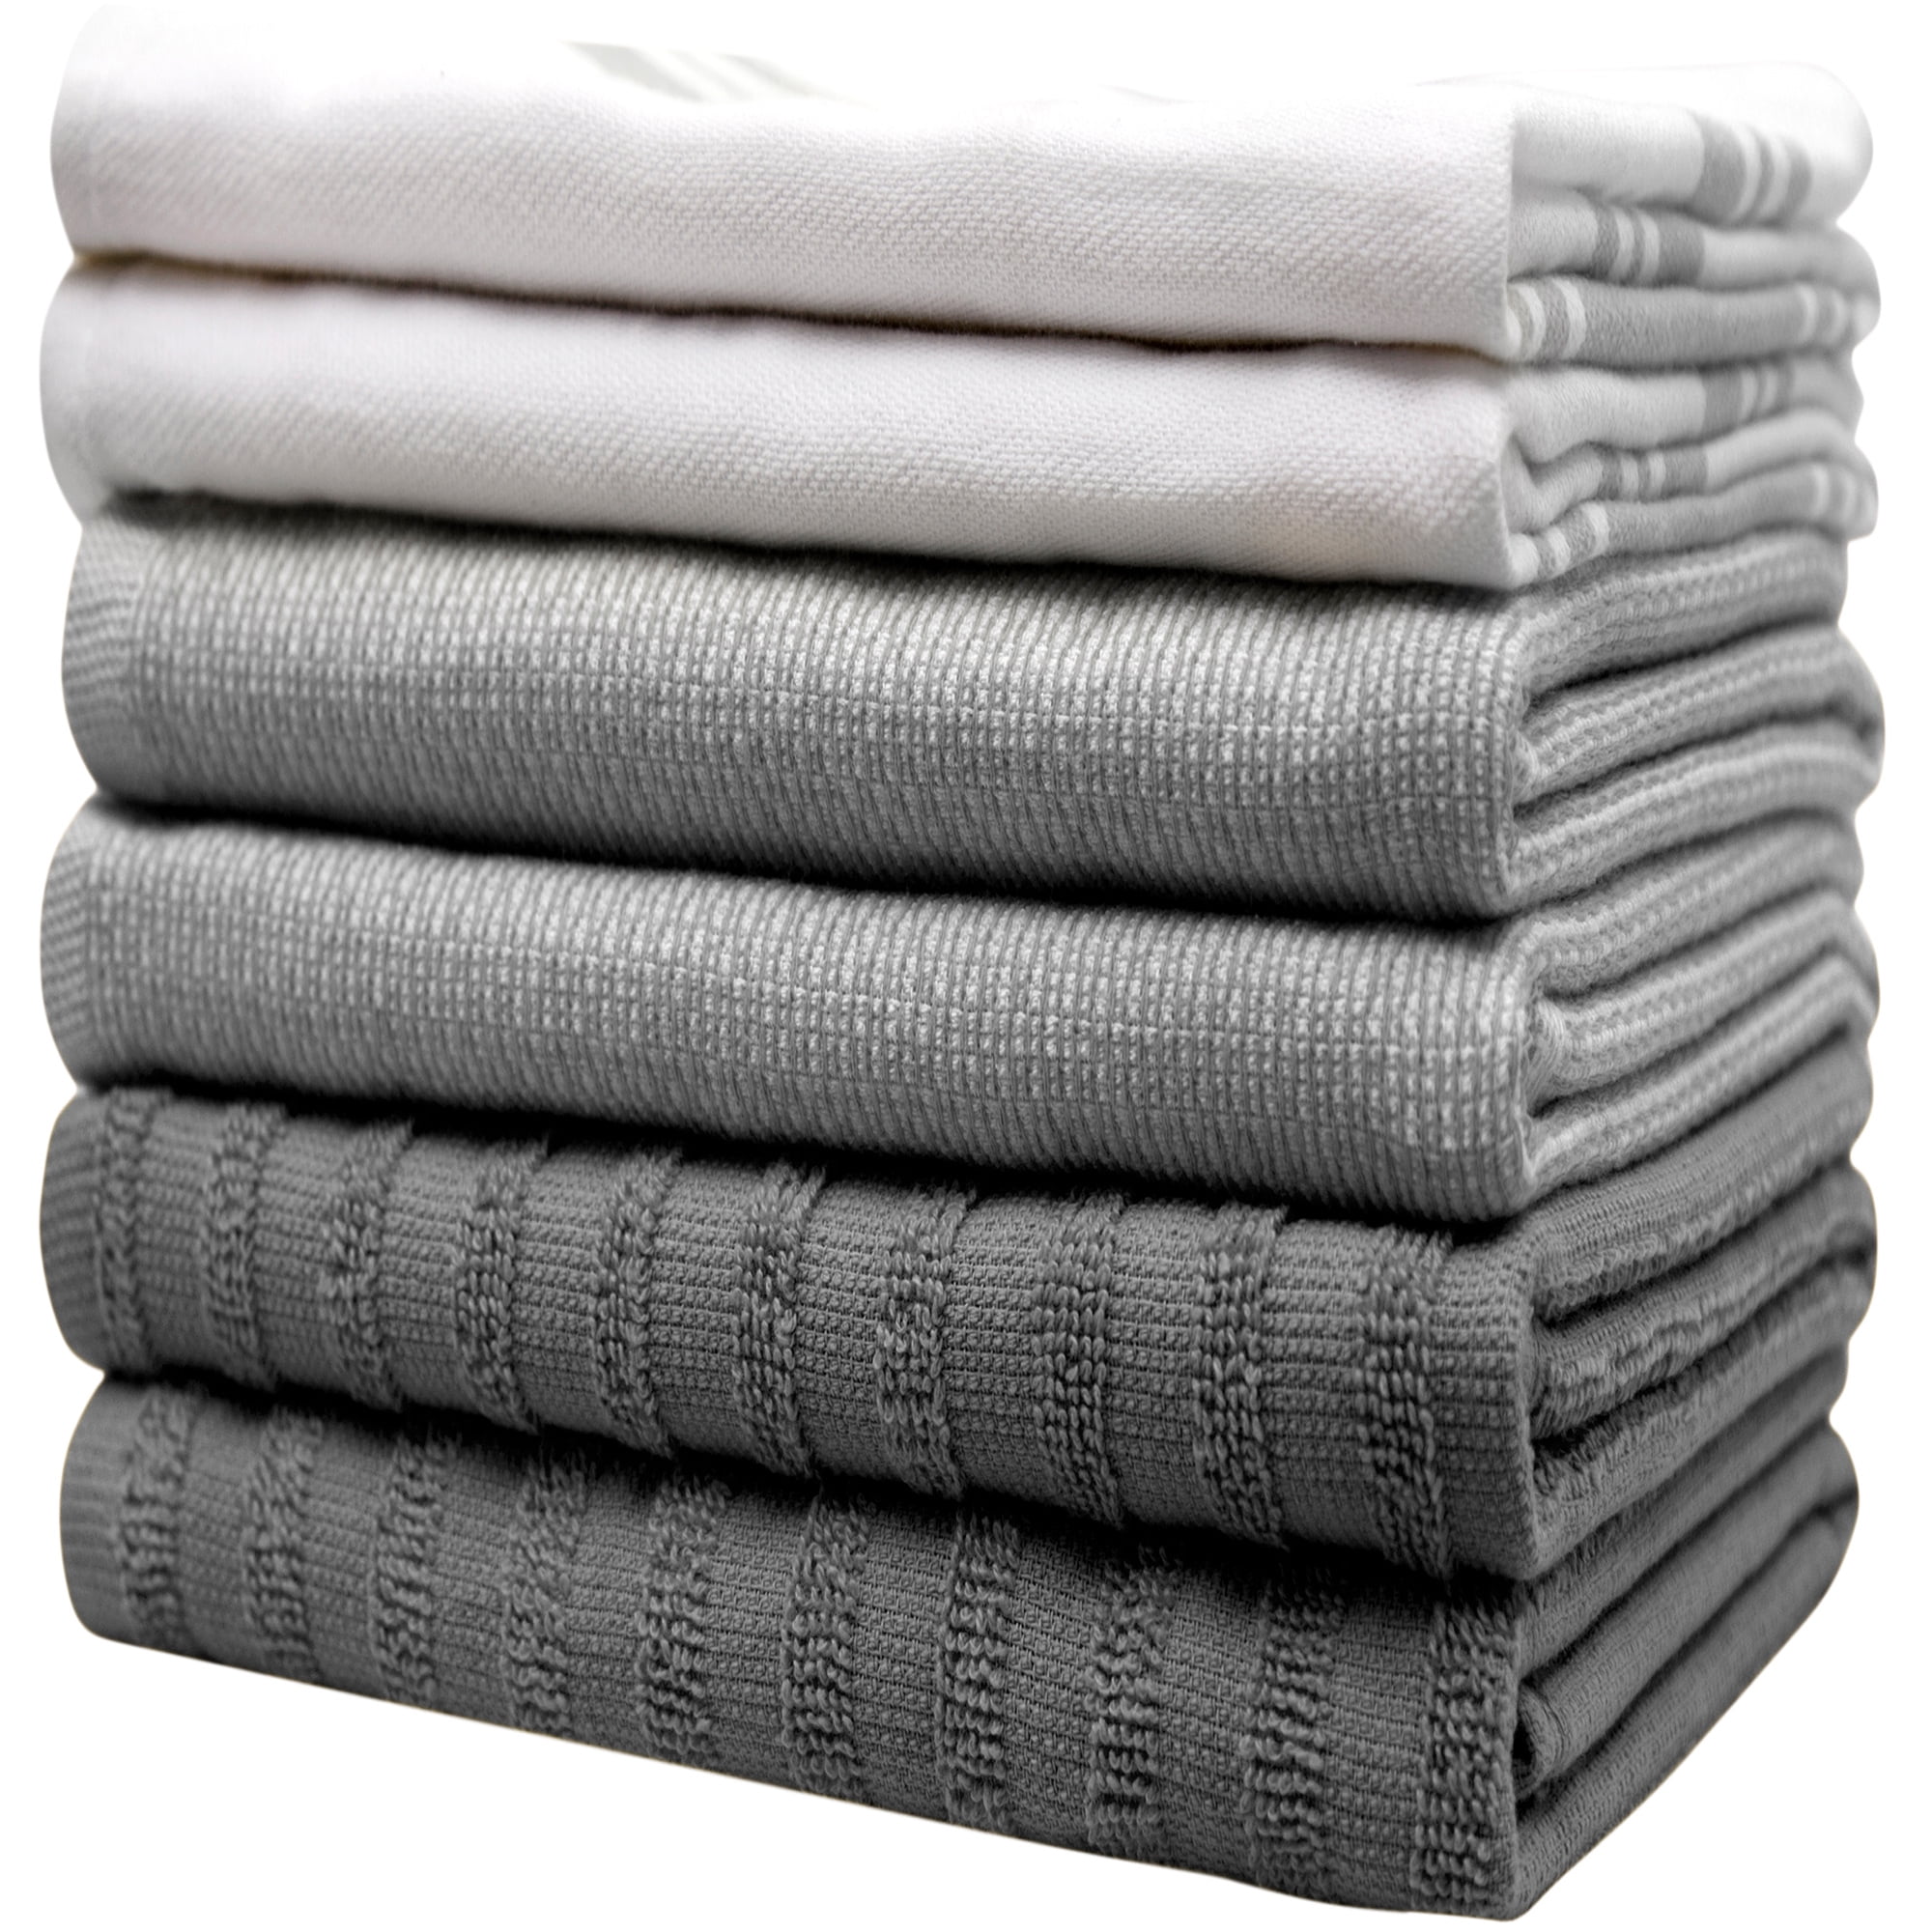 Premium Kitchen,Hand Towels (20”x 28”, 6 Pack) Large Cotton, Dish, Flat &  Terry Towel Highly Absorbent Tea Towels Set with Hanging Loop Gray